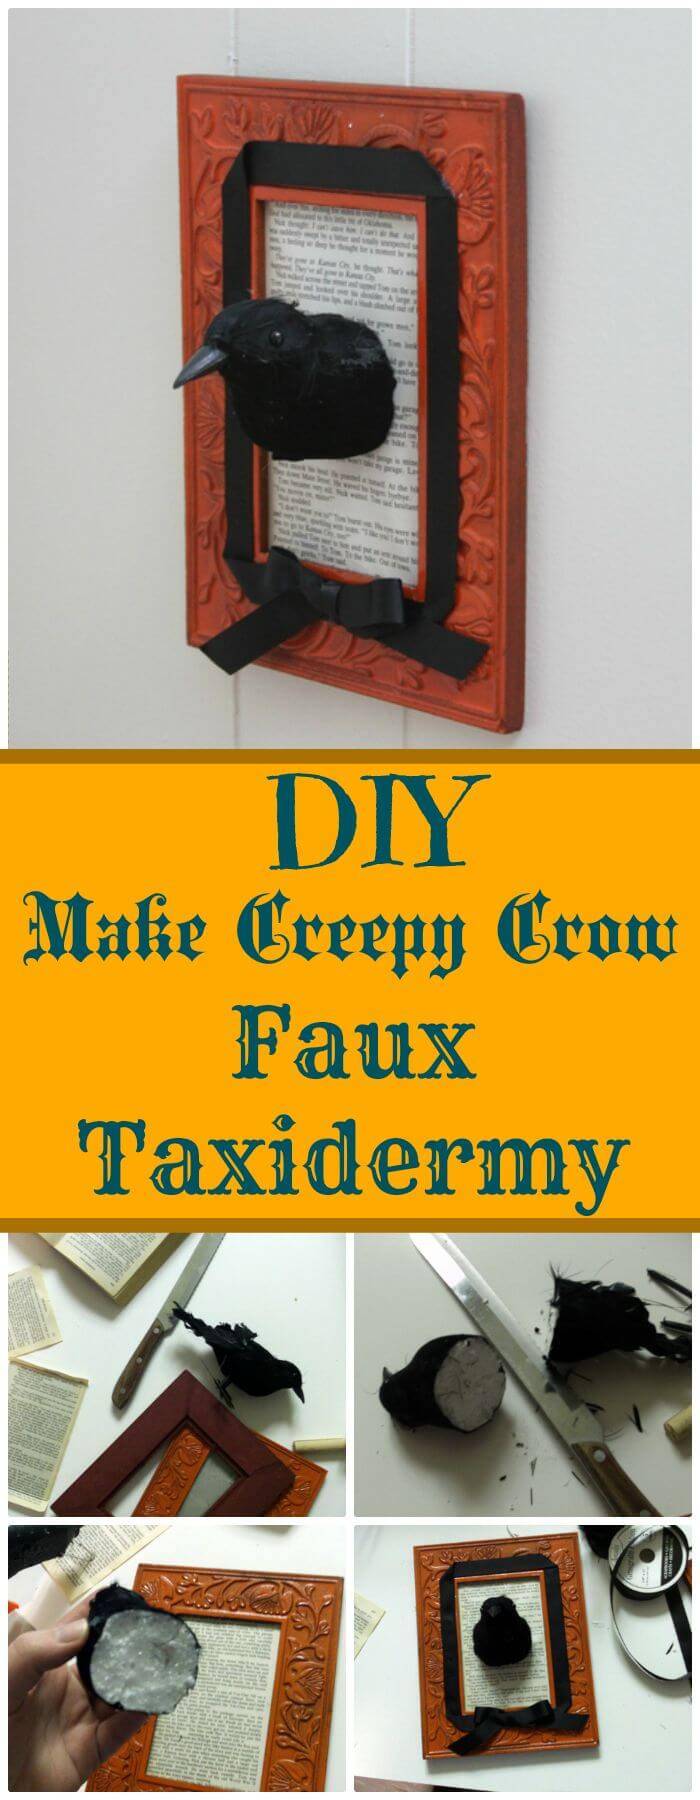 How To Make Creepy Crow Faux Taxidermy - DIY Dollar Store Crafts 